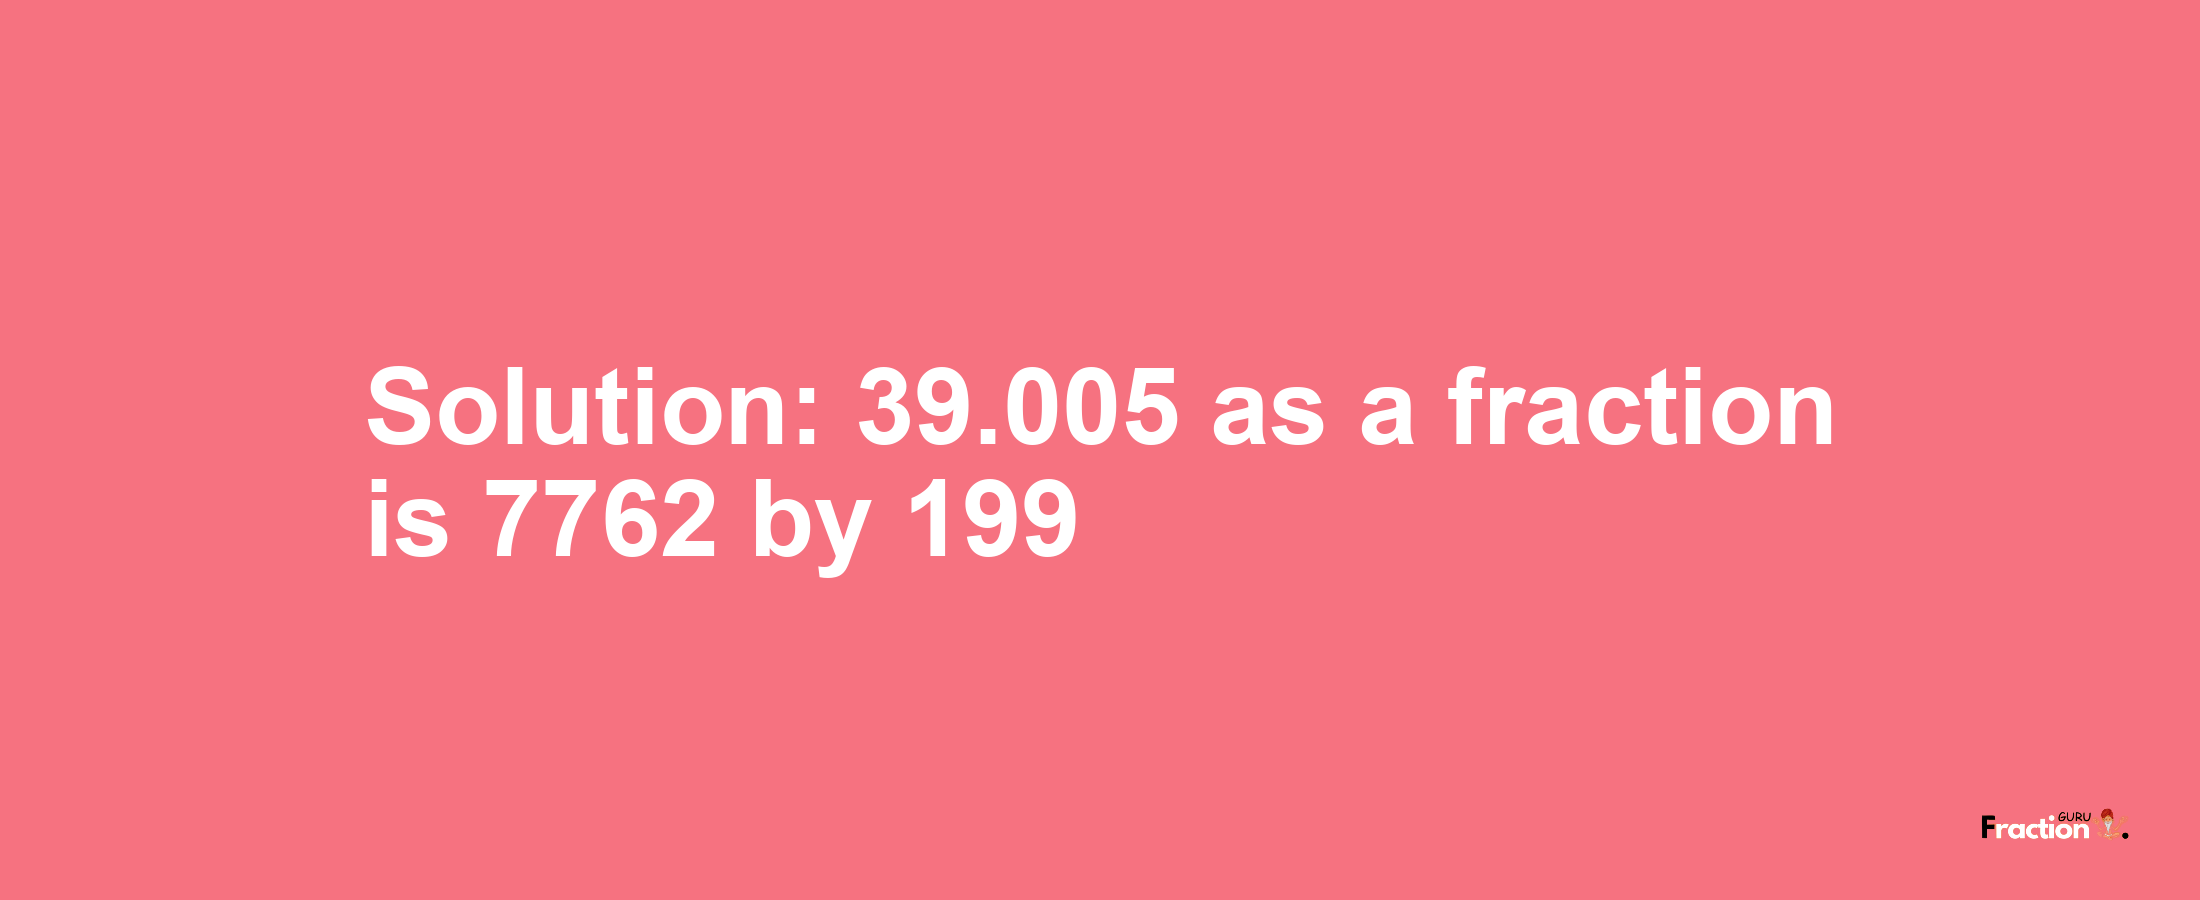 Solution:39.005 as a fraction is 7762/199